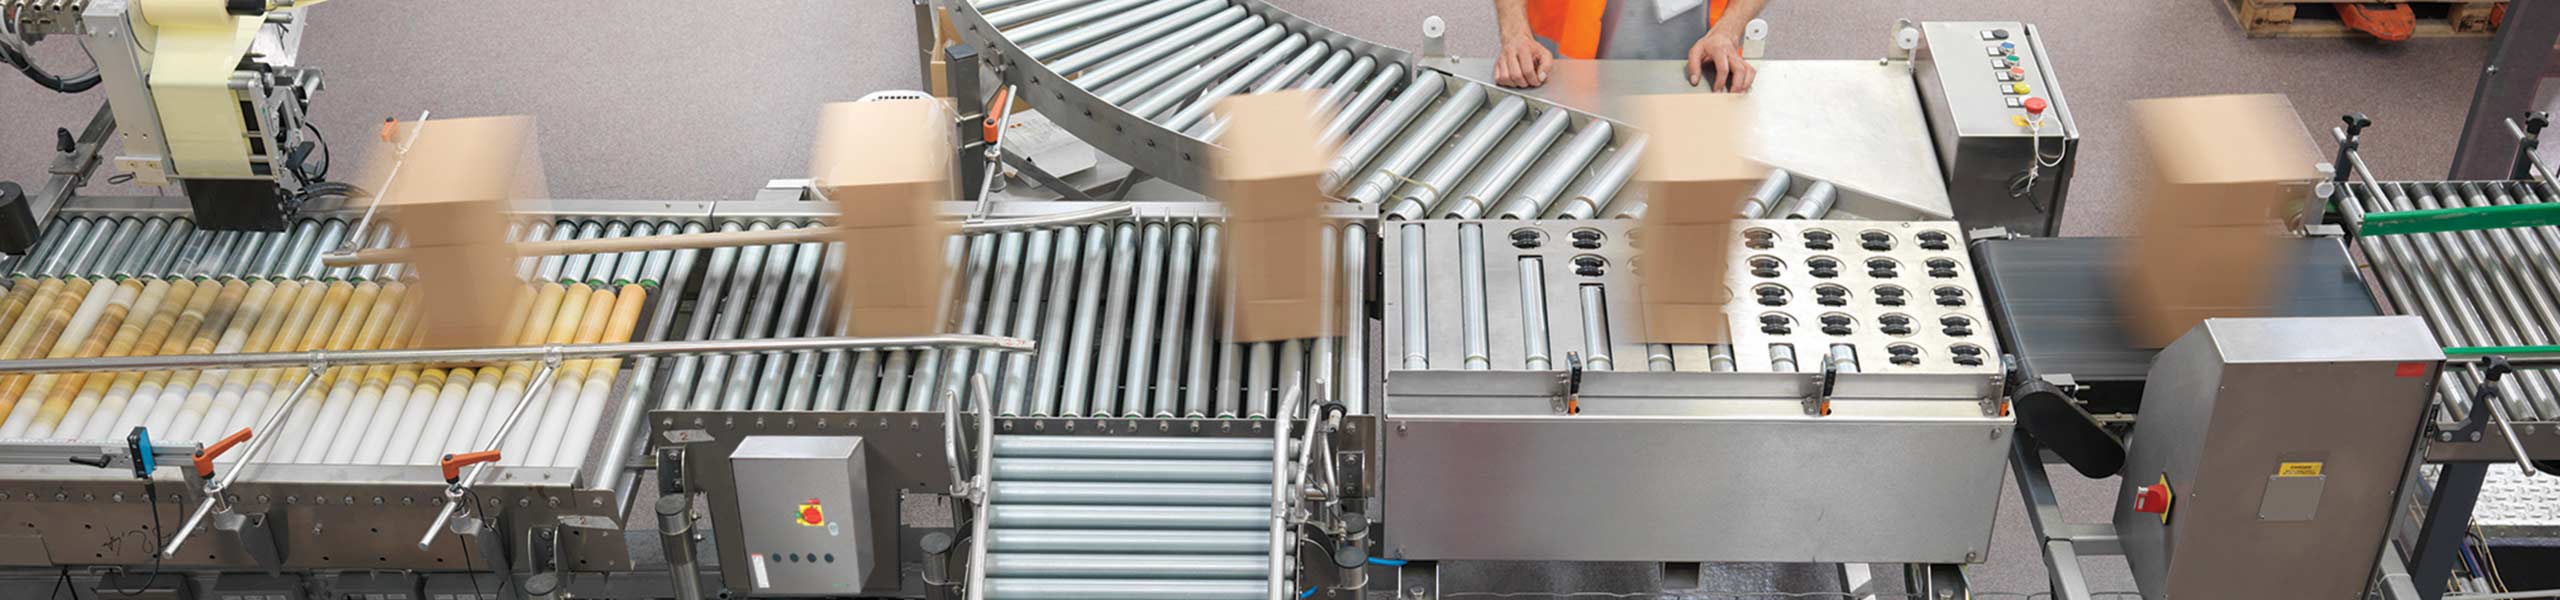 Workers managing the conveyor belt in a packaging facility, industrial automation, machine control, original equipment manufacturer.